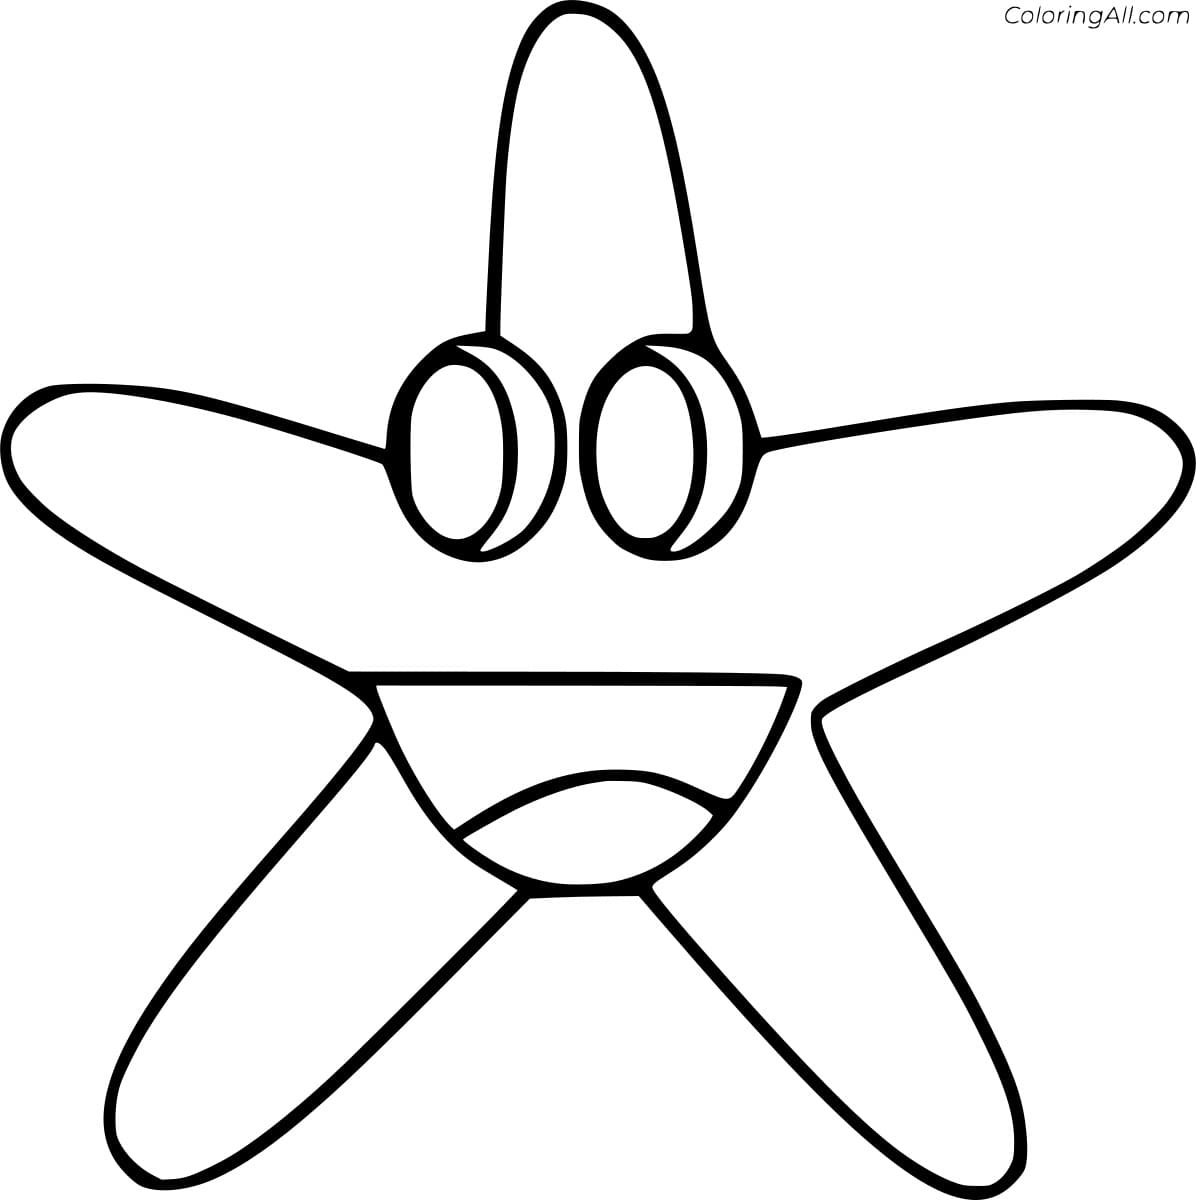 Smiling Sea Star Image Coloring Page